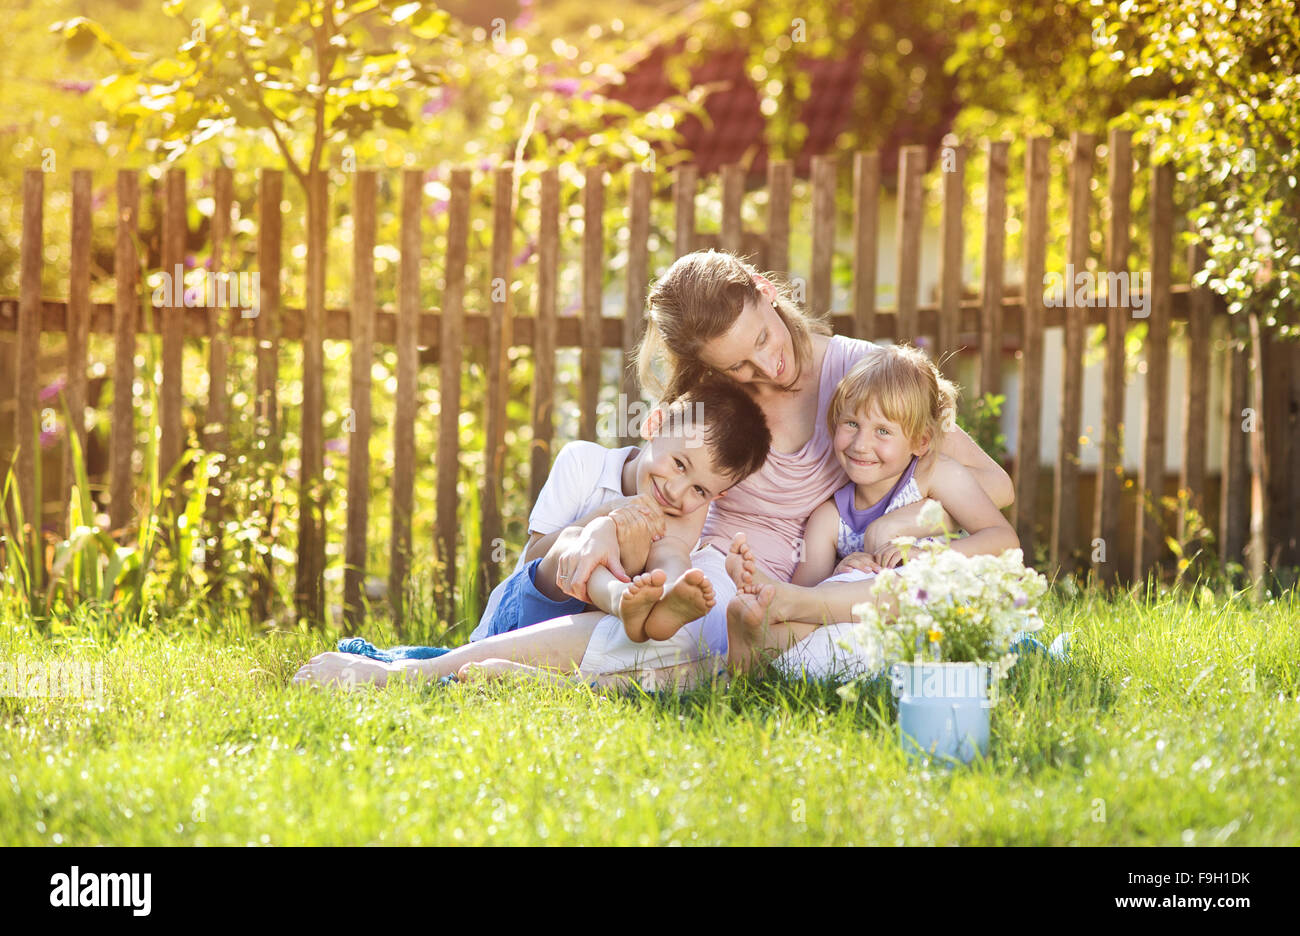 Happy mother with her children spending time together outside in green nature. Stock Photo